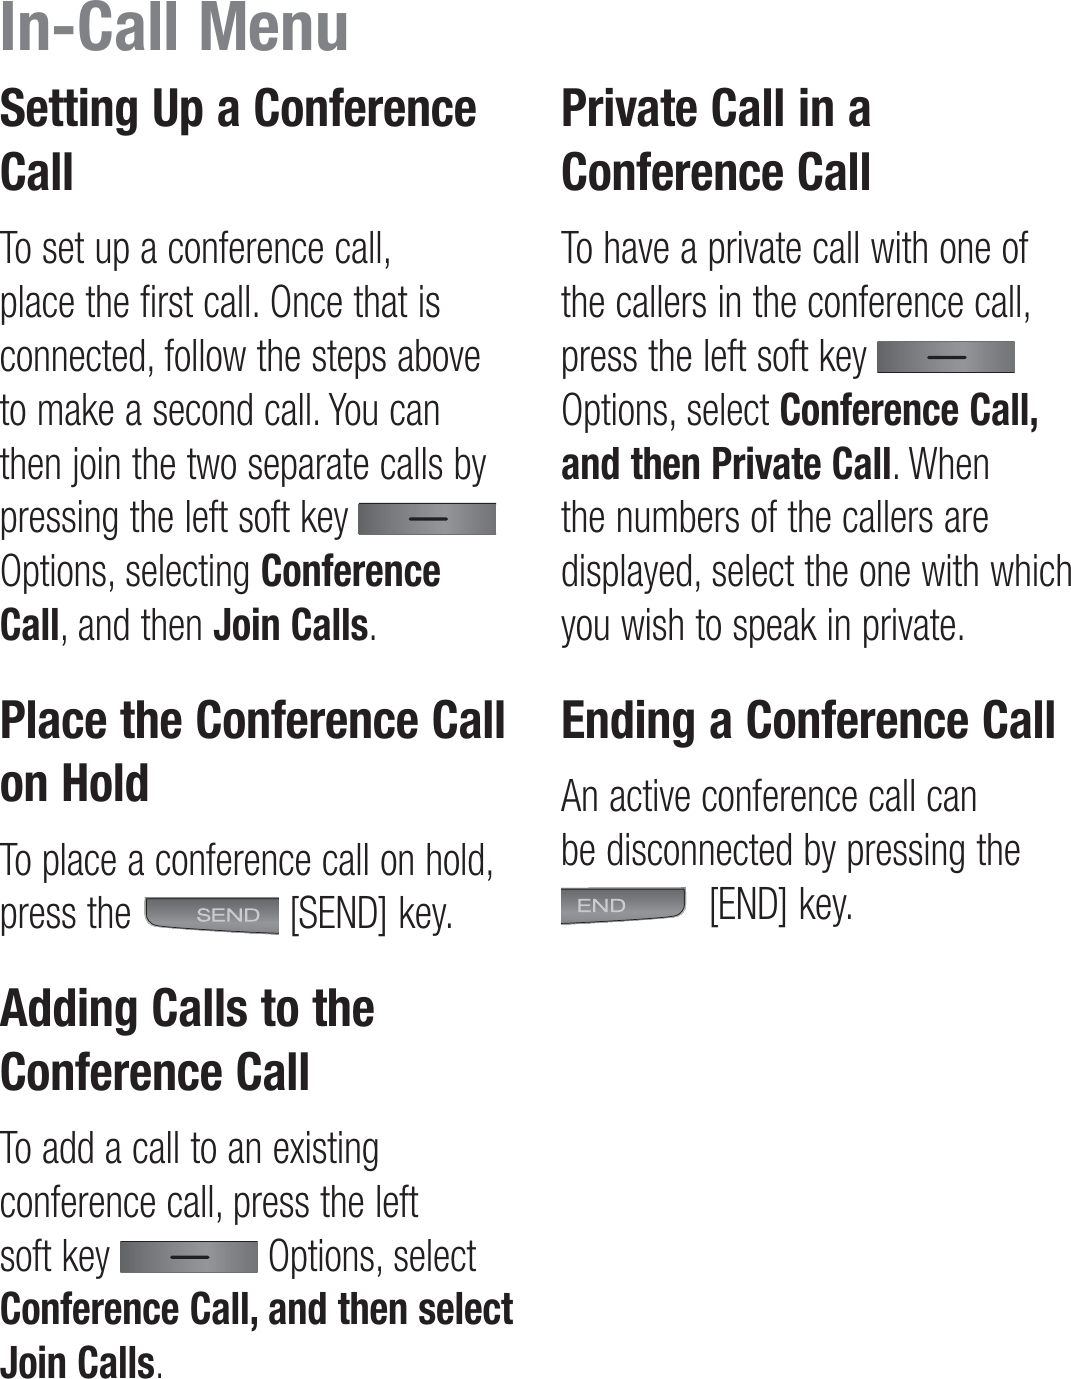 Setting Up a Conference CallTo set up a conference call, place the first call. Once that is connected, follow the steps above to make a second call. You can then join the two separate calls by pressing the left soft key   Options, selecting Conference Call, and then Join Calls.Place the Conference Call on HoldTo place a conference call on hold, press the   [SEND] key.Adding Calls to the Conference CallTo add a call to an existing conference call, press the left soft key   Options, select Conference Call, and then select Join Calls.Private Call in a Conference CallTo have a private call with one of the callers in the conference call, press the left soft key   Options, select Conference Call, and then Private Call. When the numbers of the callers are displayed, select the one with which you wish to speak in private.Ending a Conference CallAn active conference call can be disconnected by pressing the  [END] key.In-Call Menu